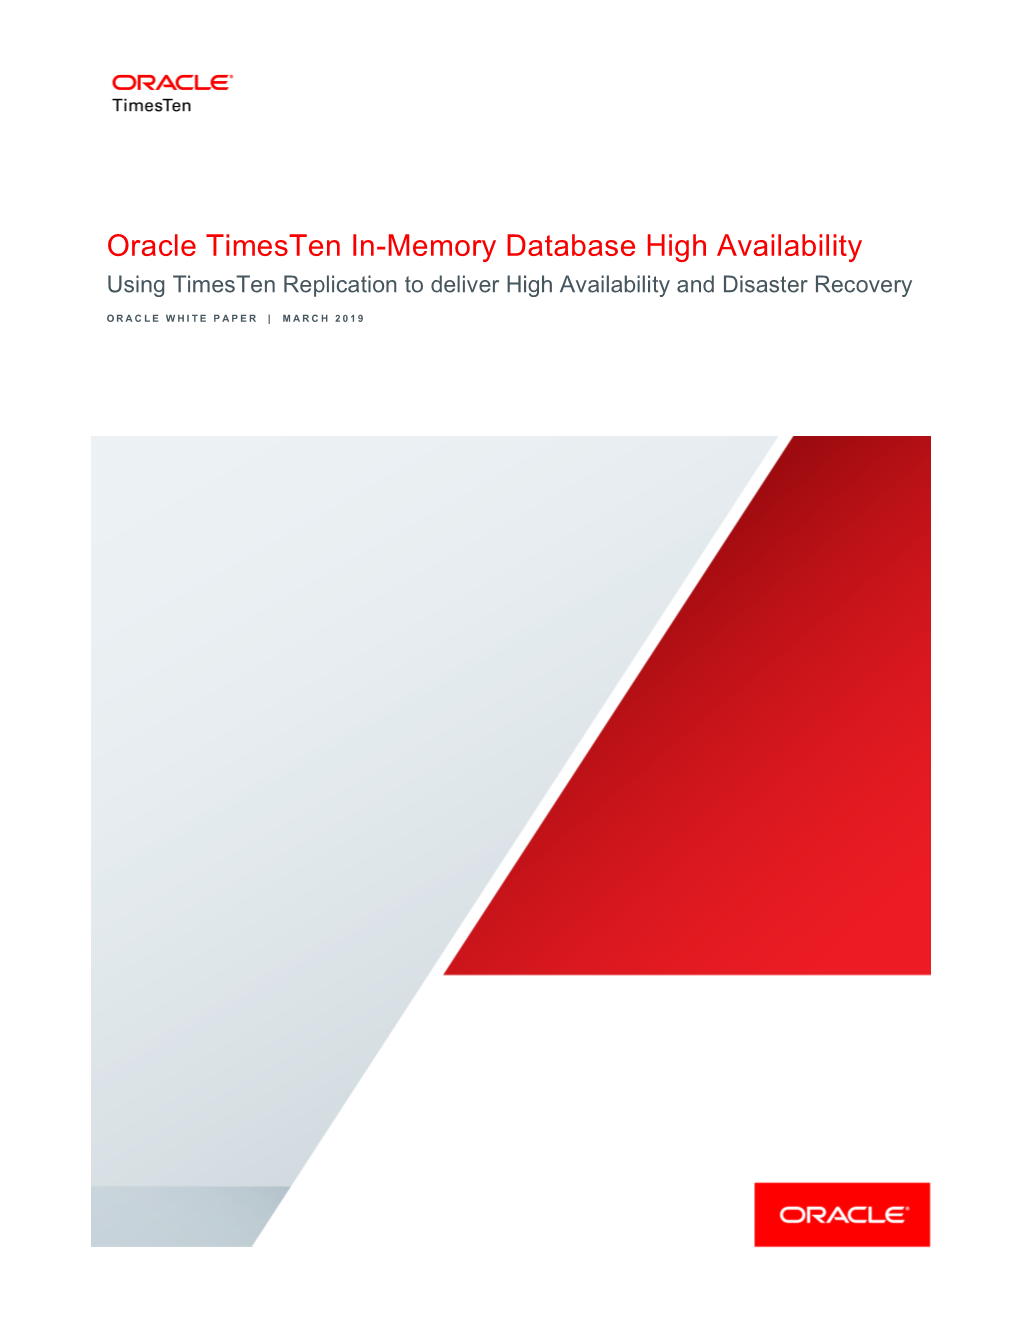 Oracle Timesten In-Memory Database High Availability Using Timesten Replication to Deliver High Availability and Disaster Recovery